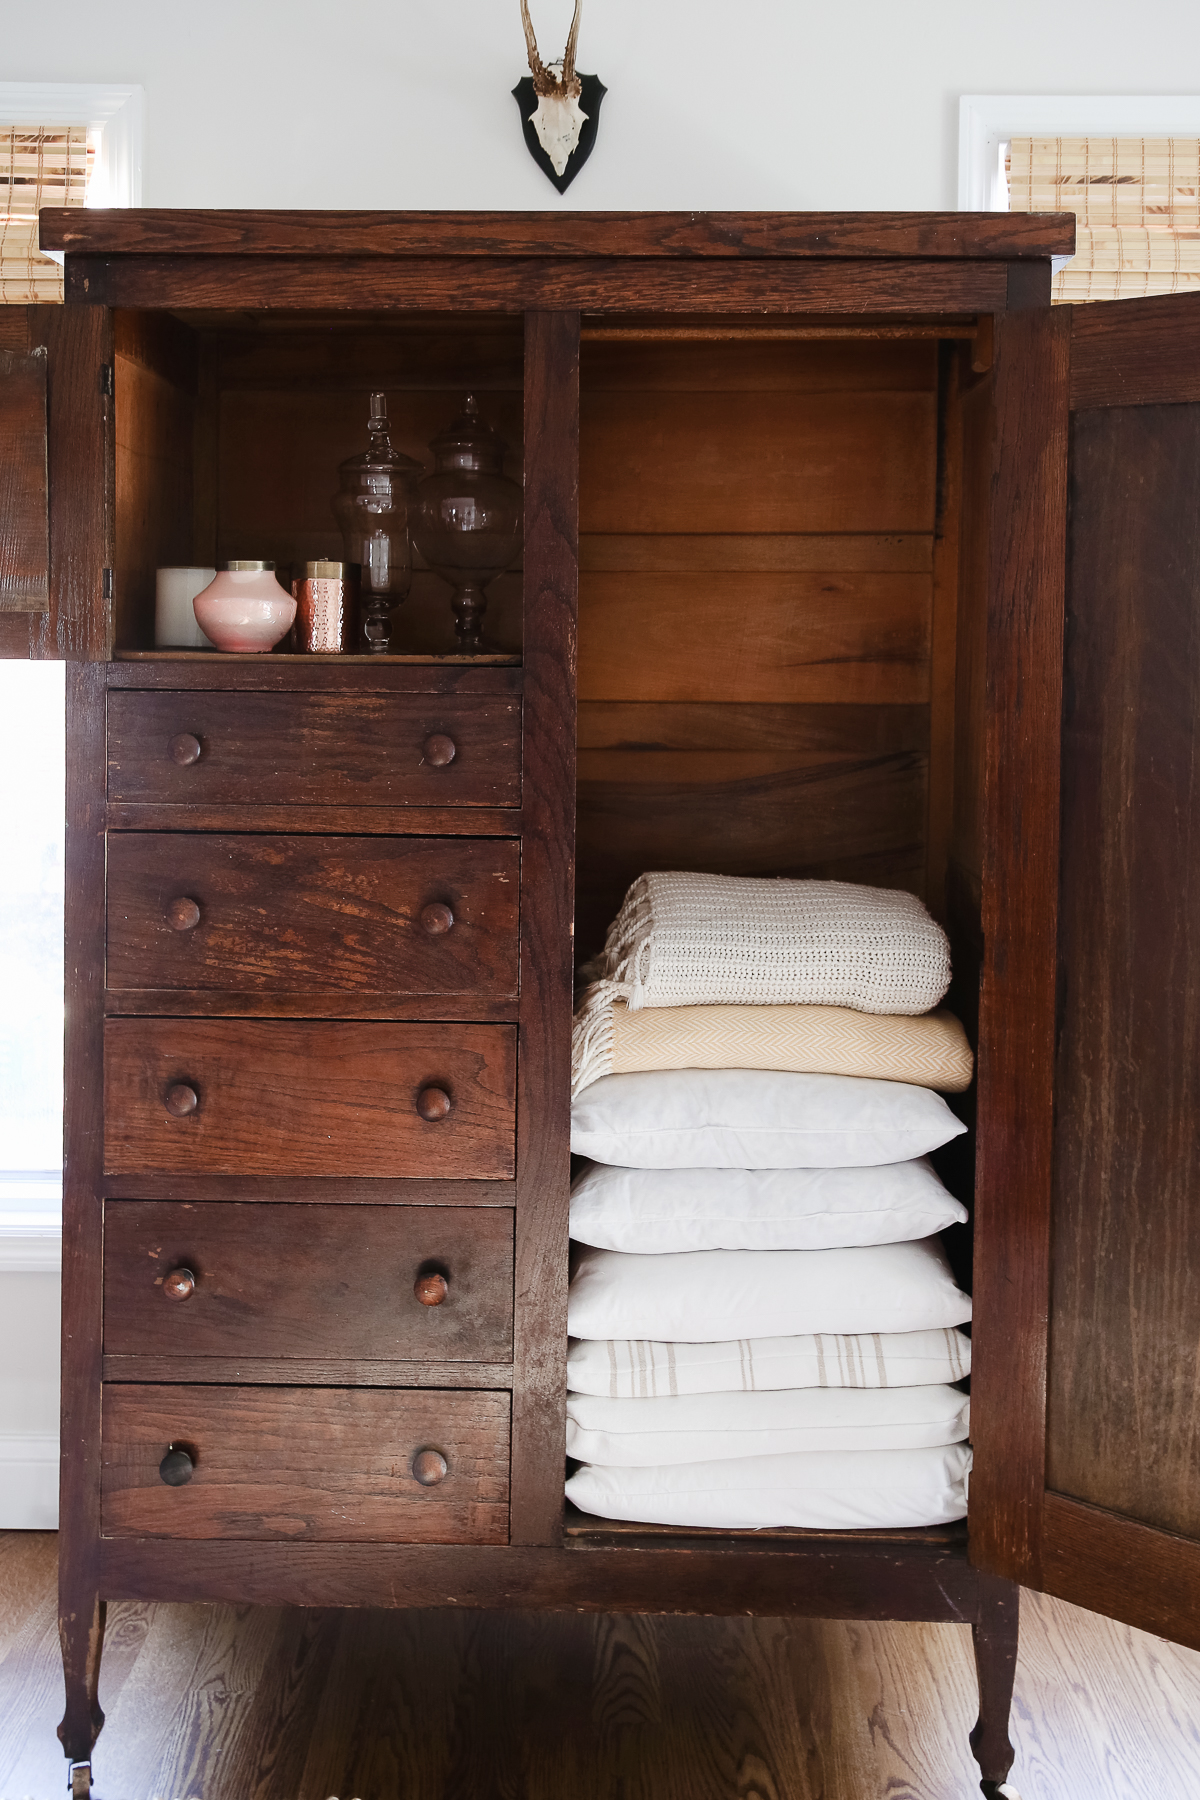 A home organization armoire filled with towels and linens.